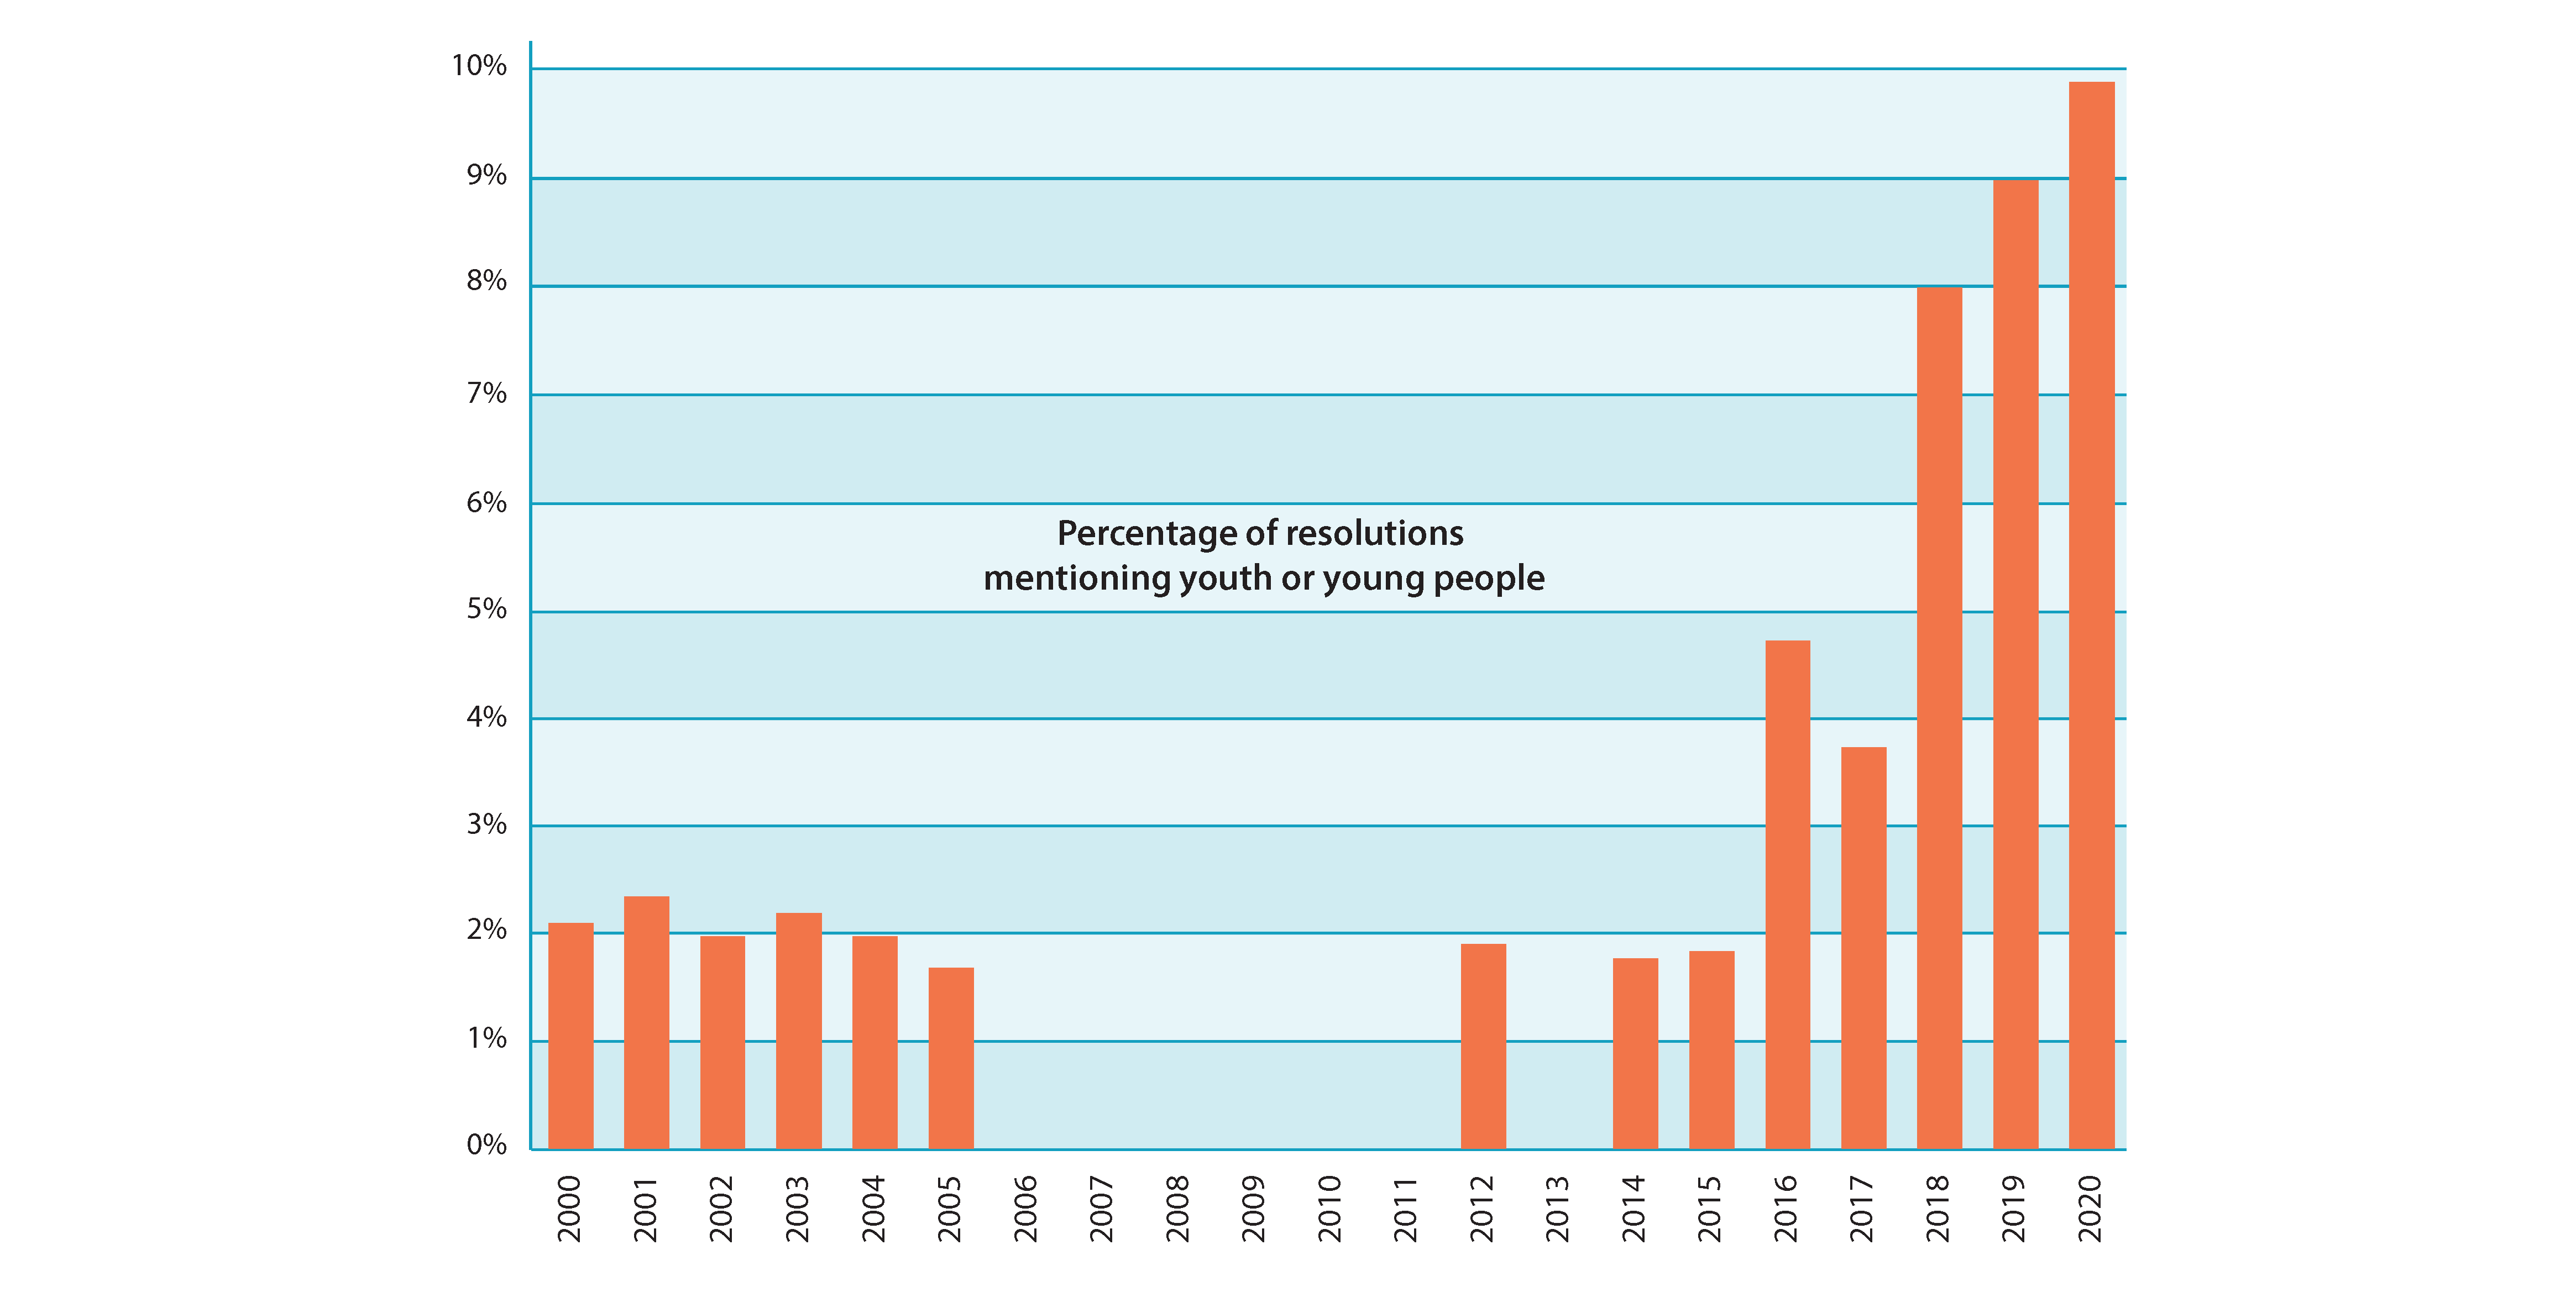 Bar graph: Percentage of resolutions mentioning youth or young people, 2000-2020